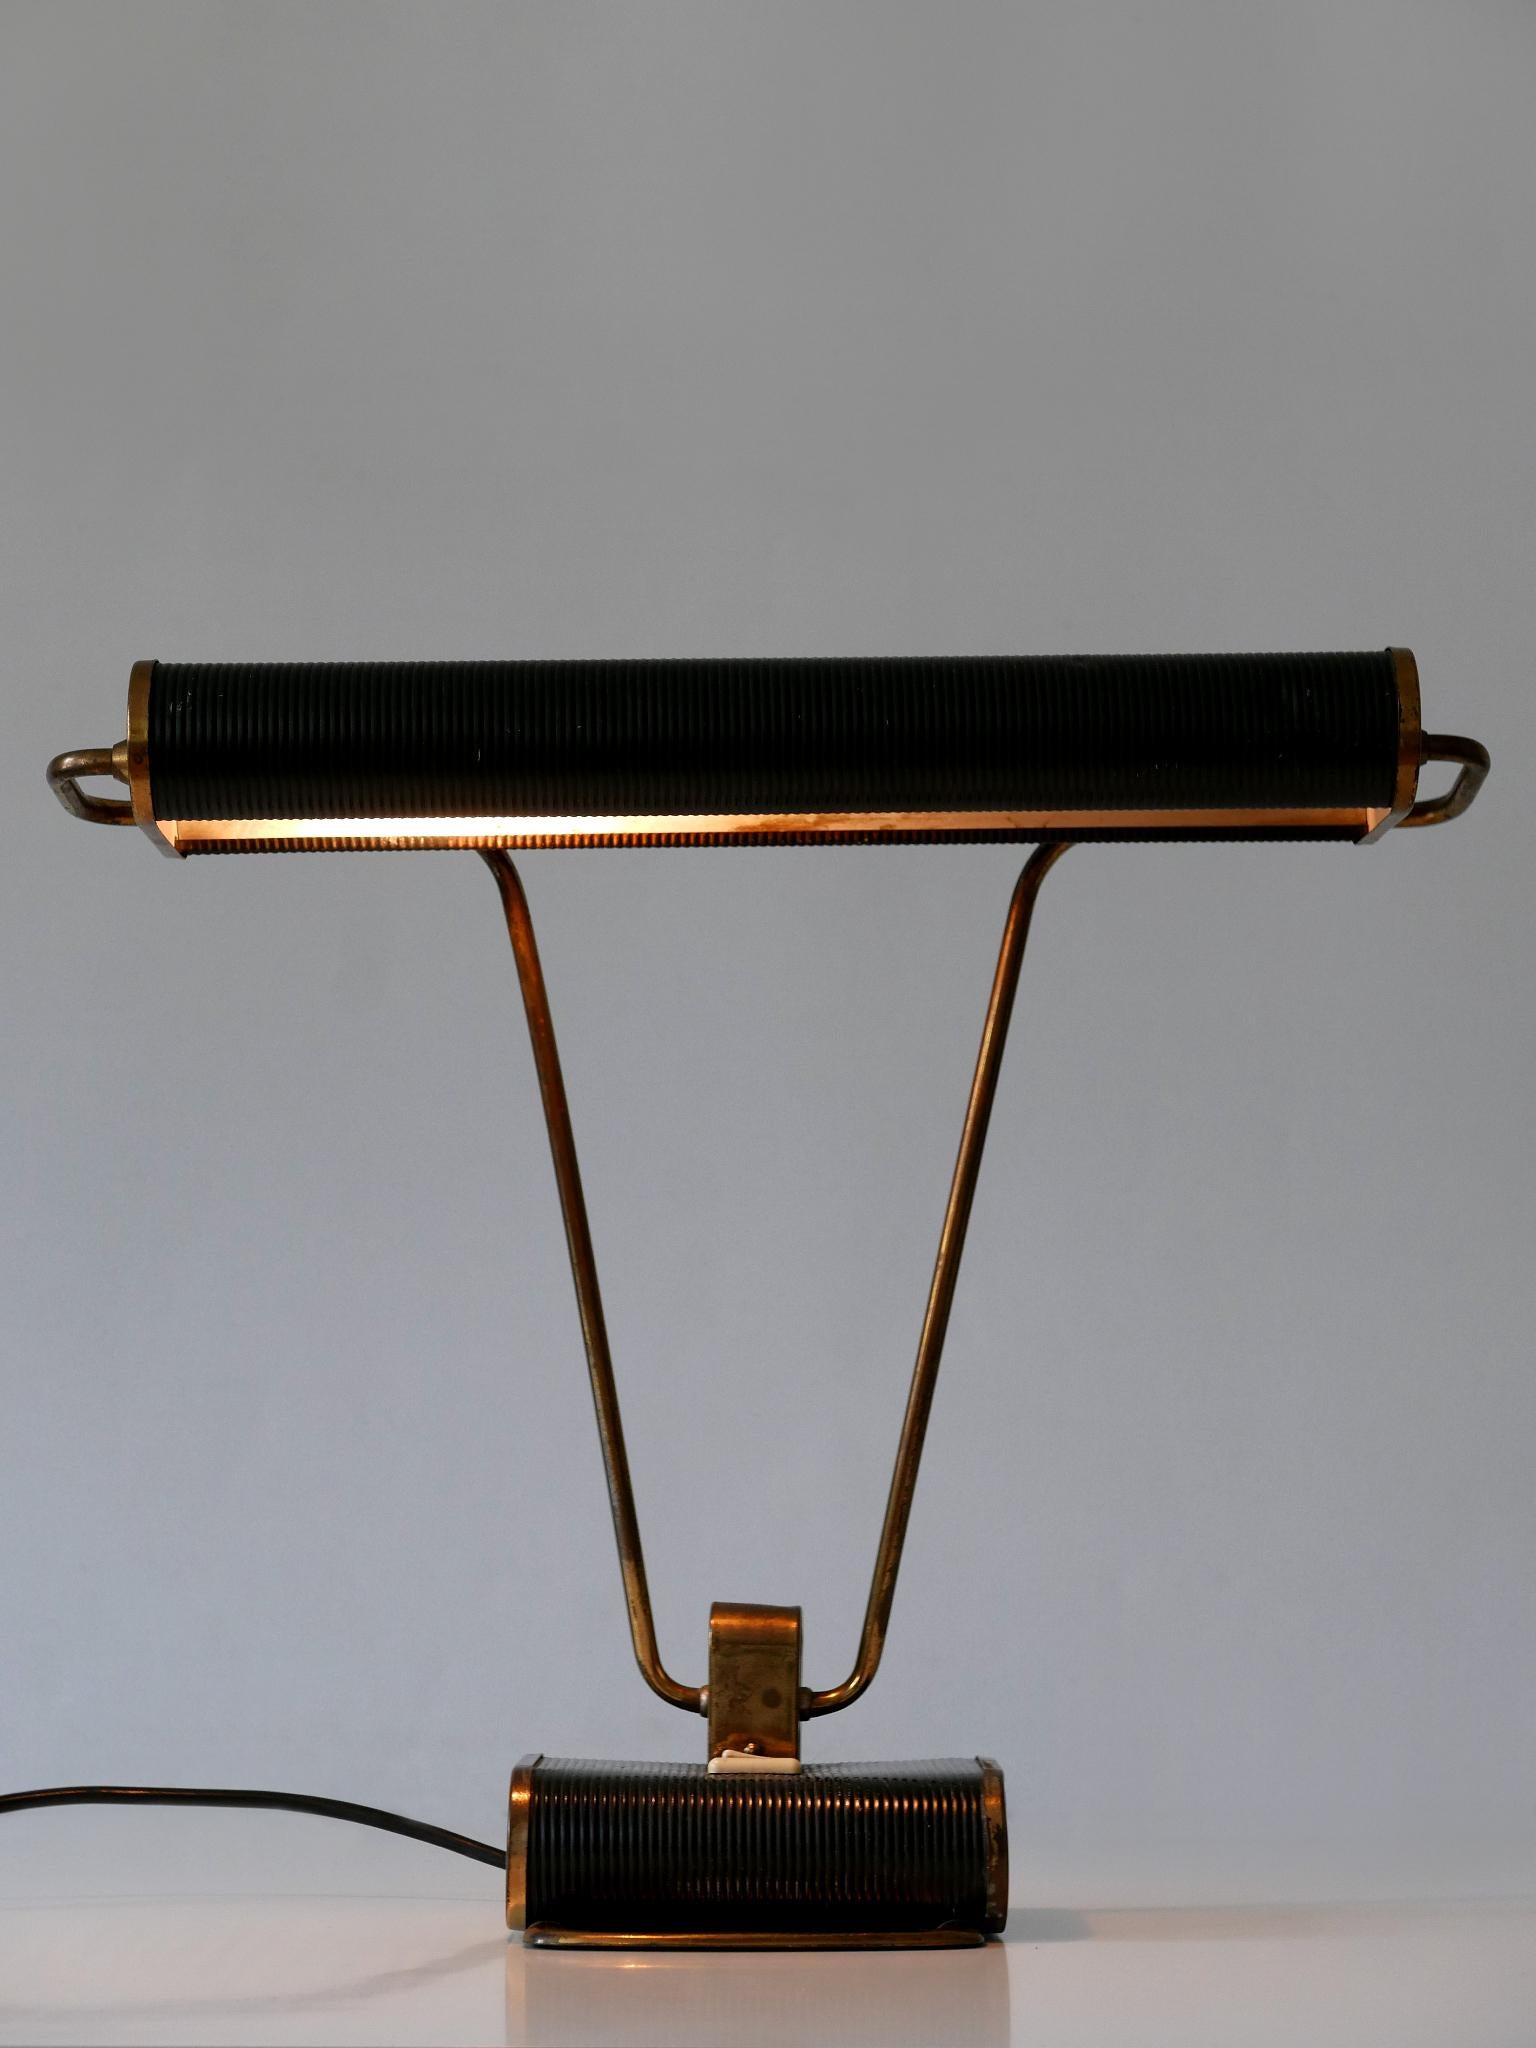 Art Deco Table Lamp or Desk Light 'No 71' by André Mounique for Jumo 1930s For Sale 3